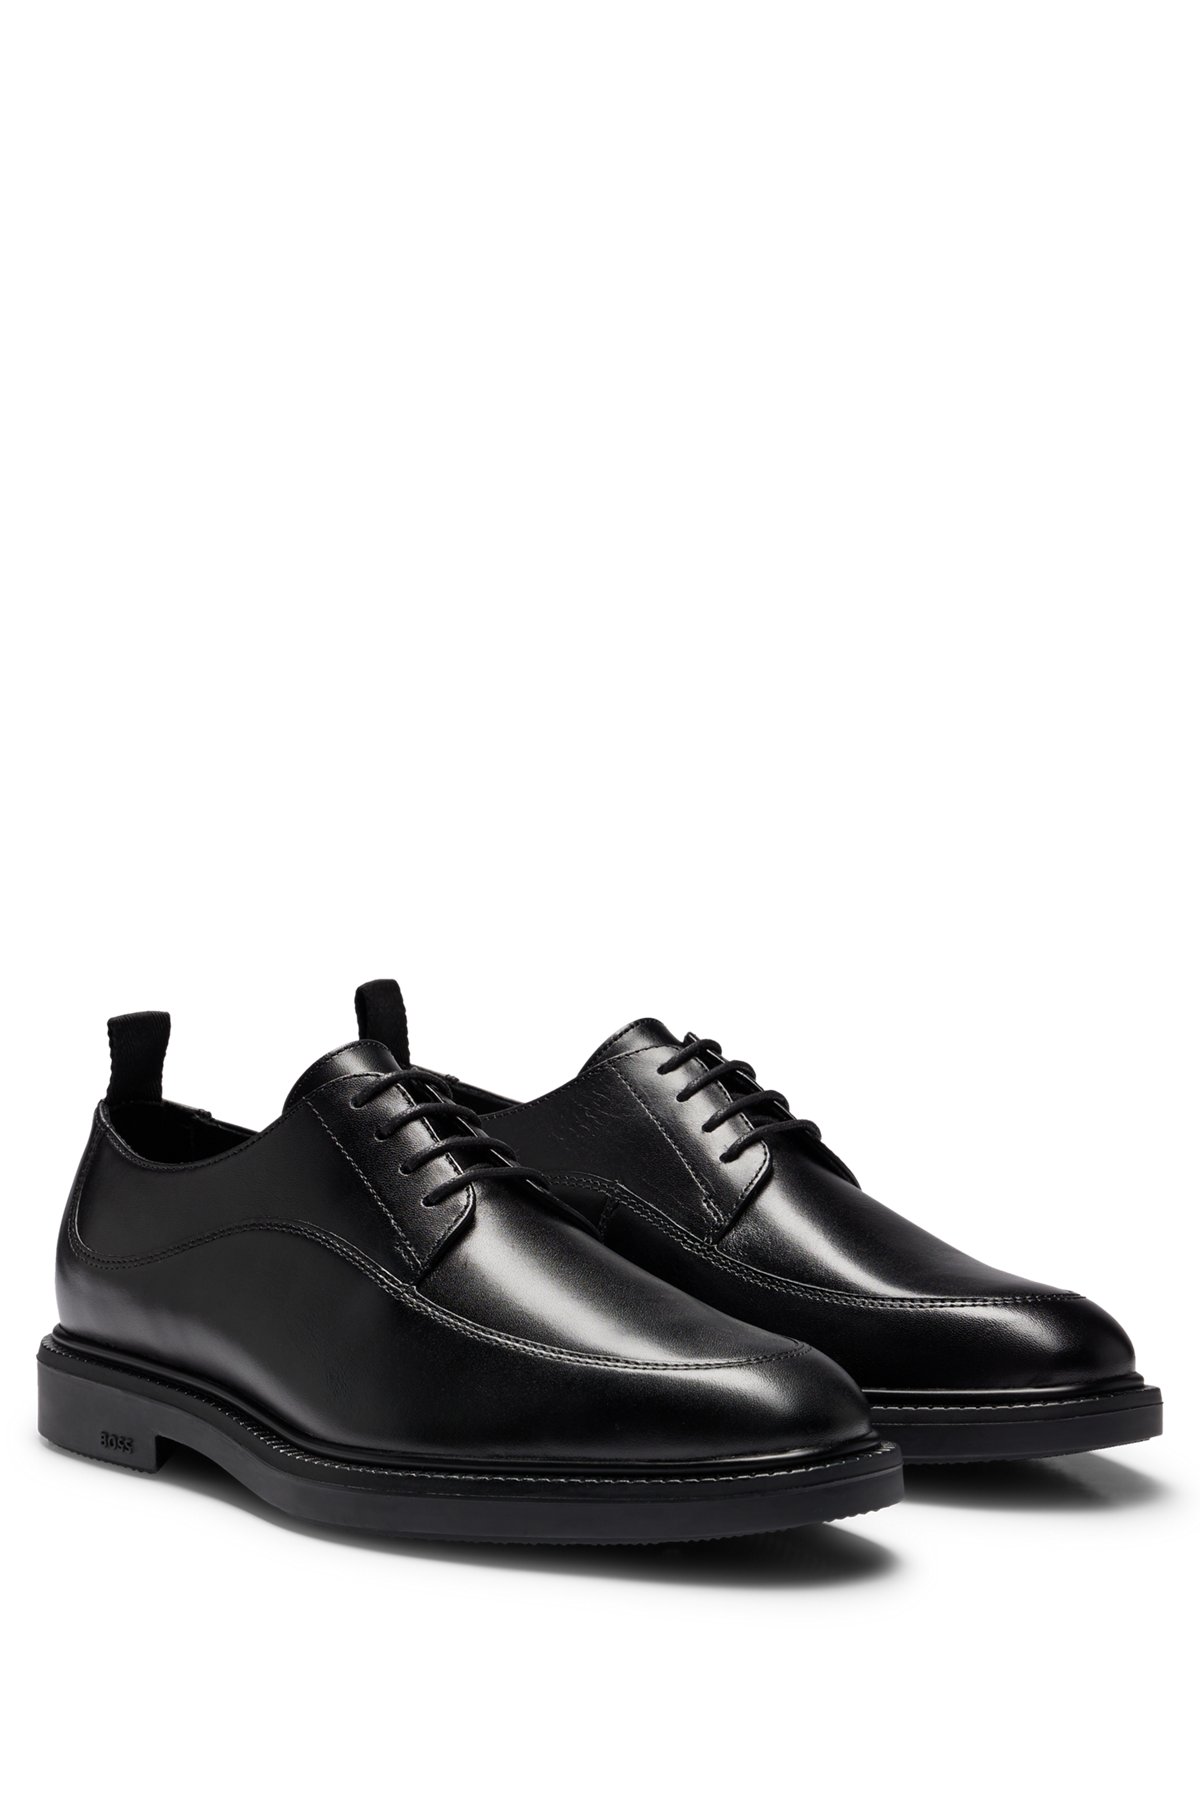 Leather lace-up Derby shoes with stitching detail, Black